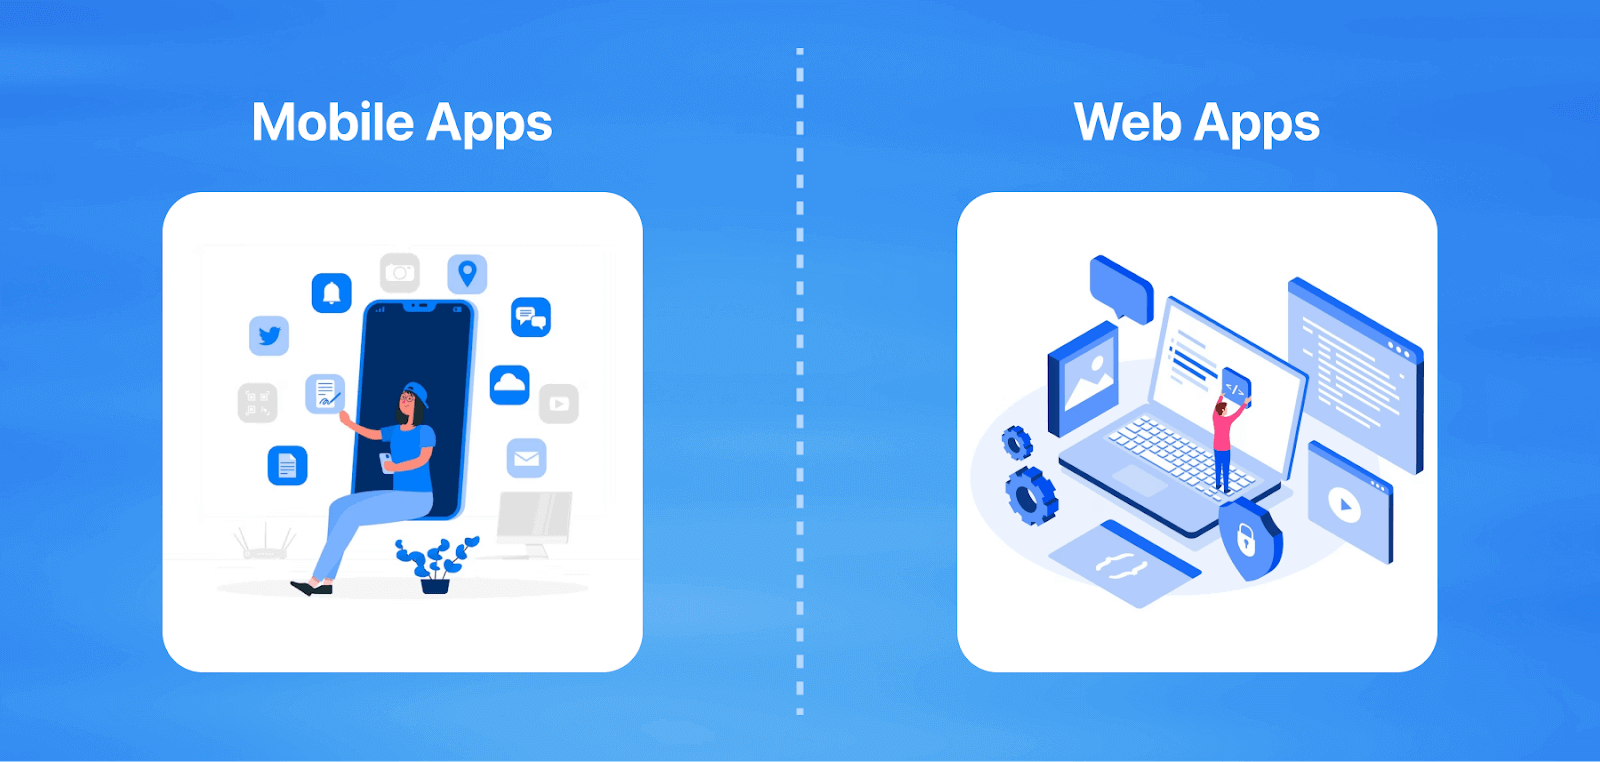 How do mobile apps differ from web apps